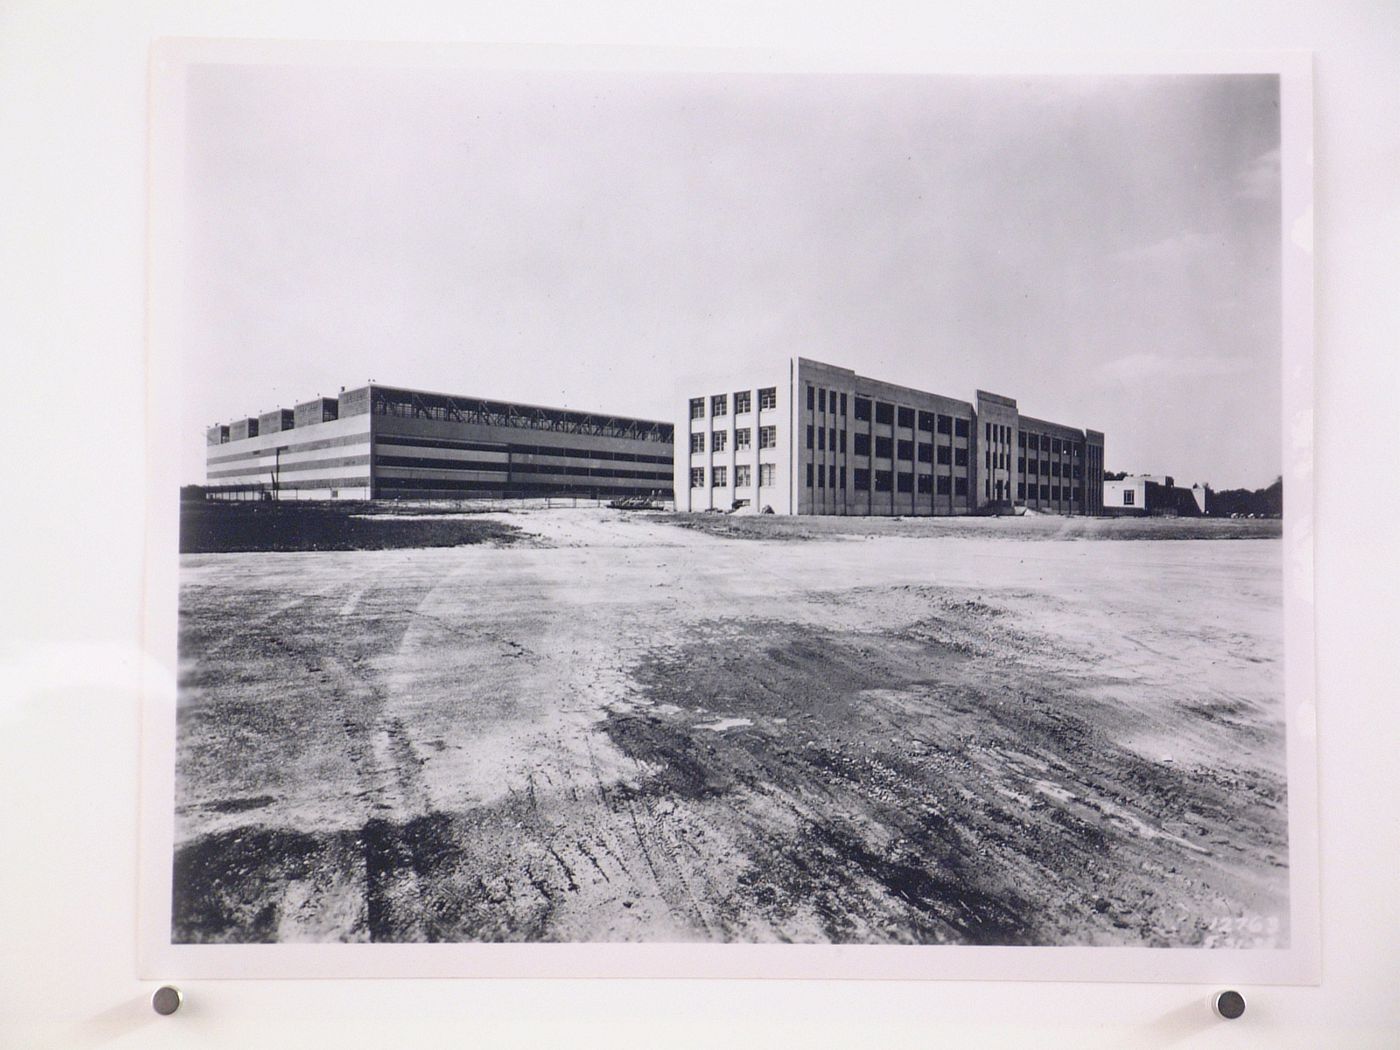 View of the principal and lateral façades of the [second] Assembly Building on the left and the Administration Building in the centre, both under construction, Glenn L. Martin Company Navy Assembly Plant No. 2, Middle River, Maryland